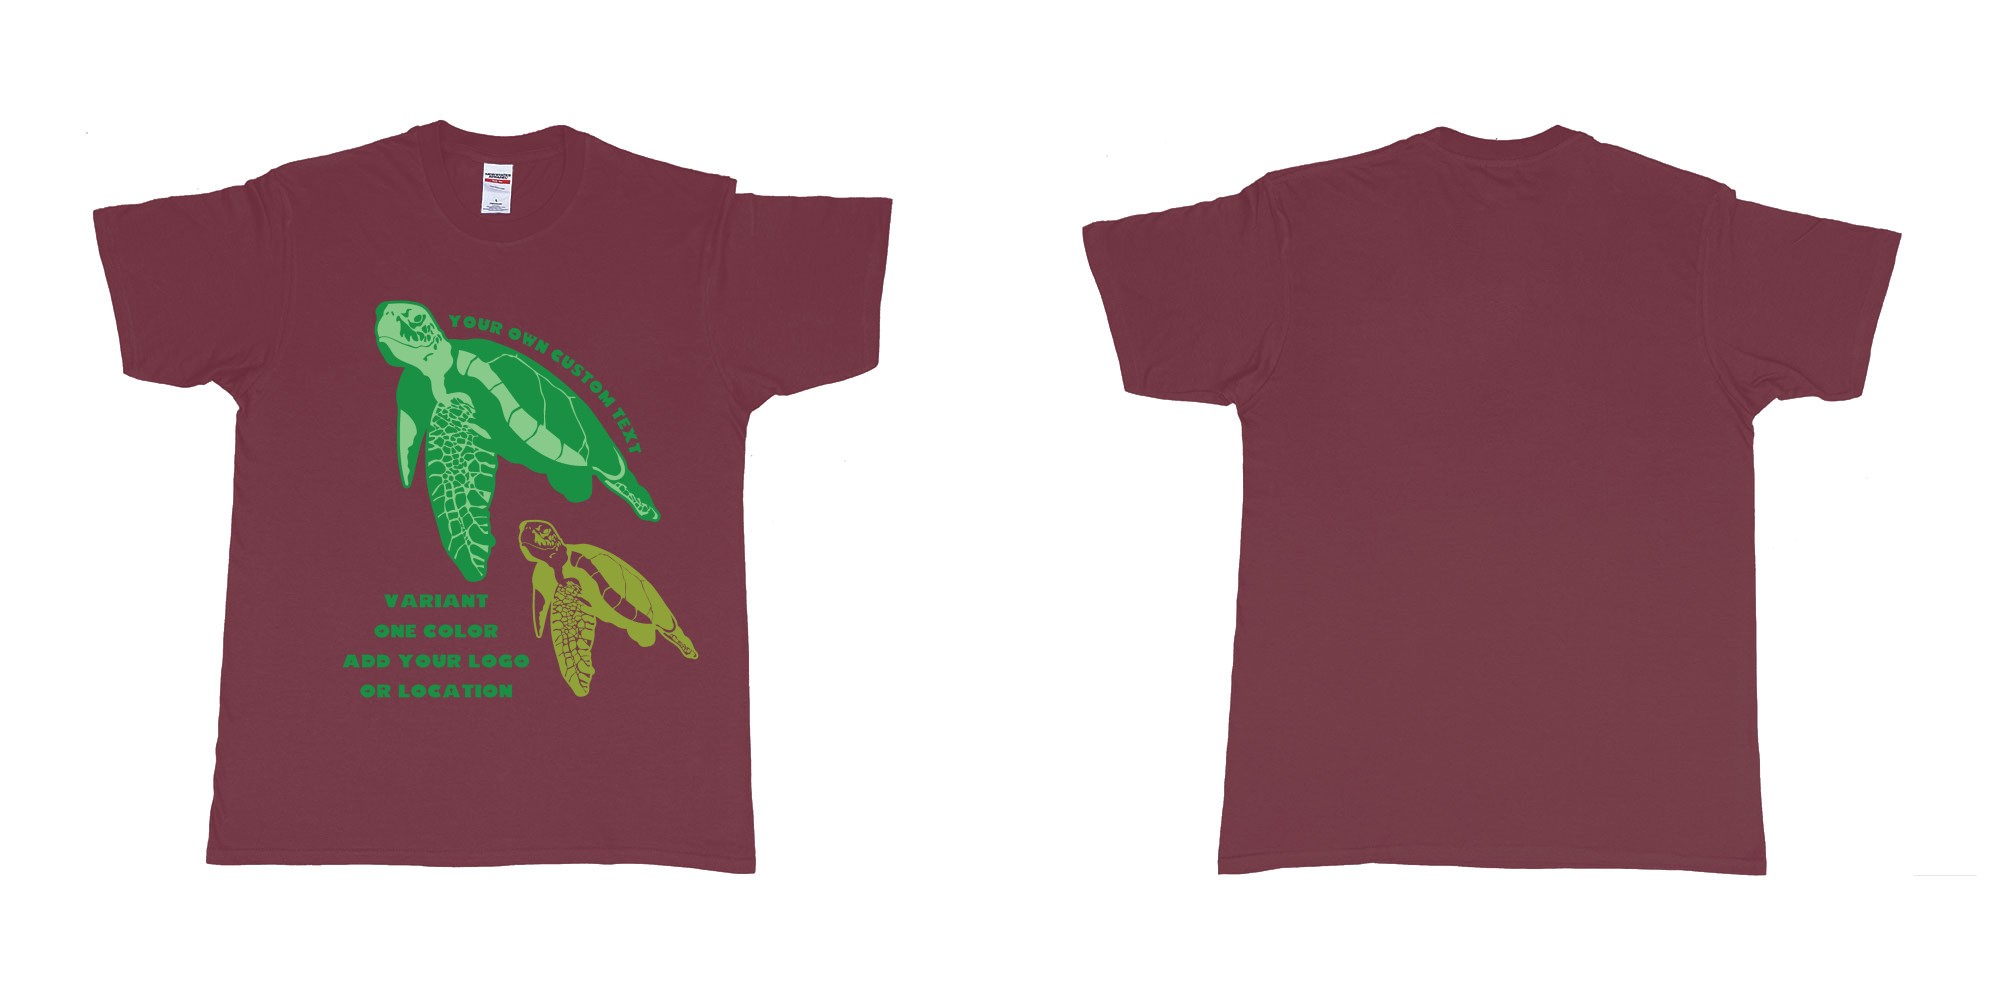 Custom tshirt design hawksbill green sea turtle chilling add logo in fabric color marron choice your own text made in Bali by The Pirate Way